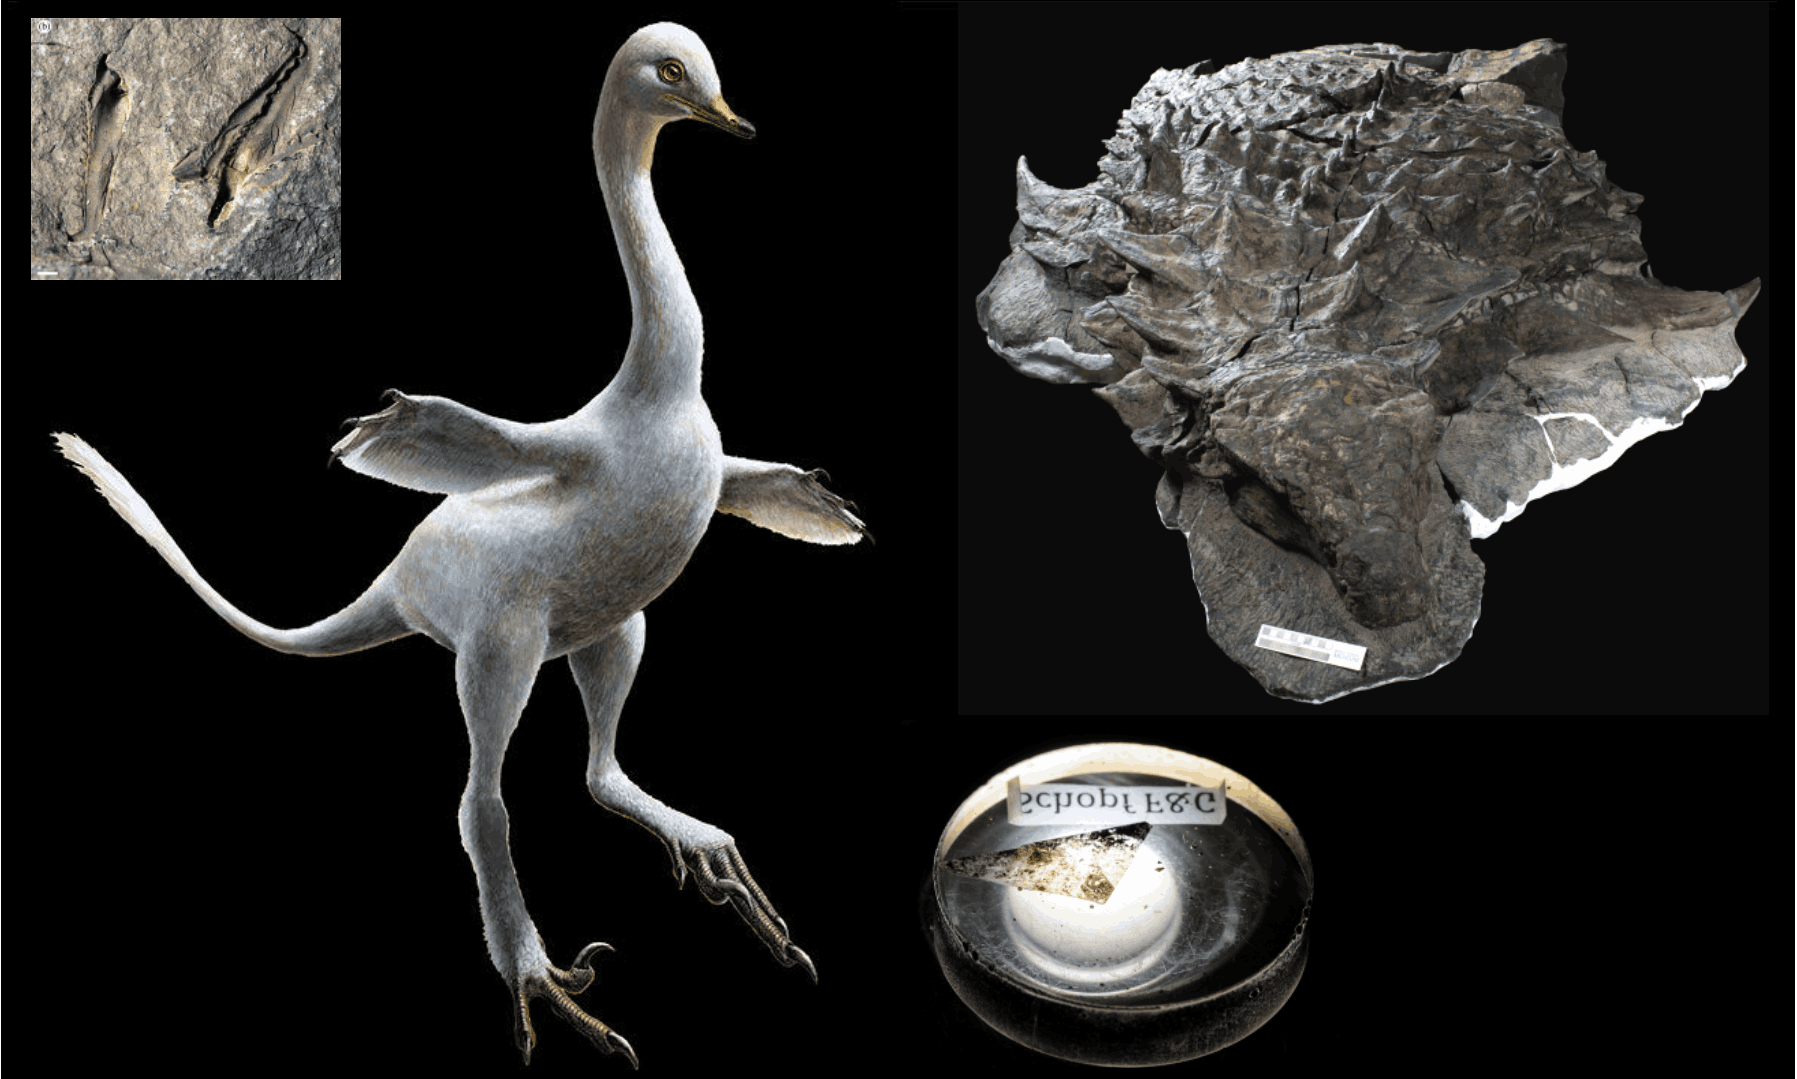  Some of the best fossils of 2017. Composite: WILLIAM GRAF, University of Wisconsin – Madison/Erikkson et al 2017/Lukas Panzarin/Andrea Cau/Royal Tyrrell Museum of Palaeontology